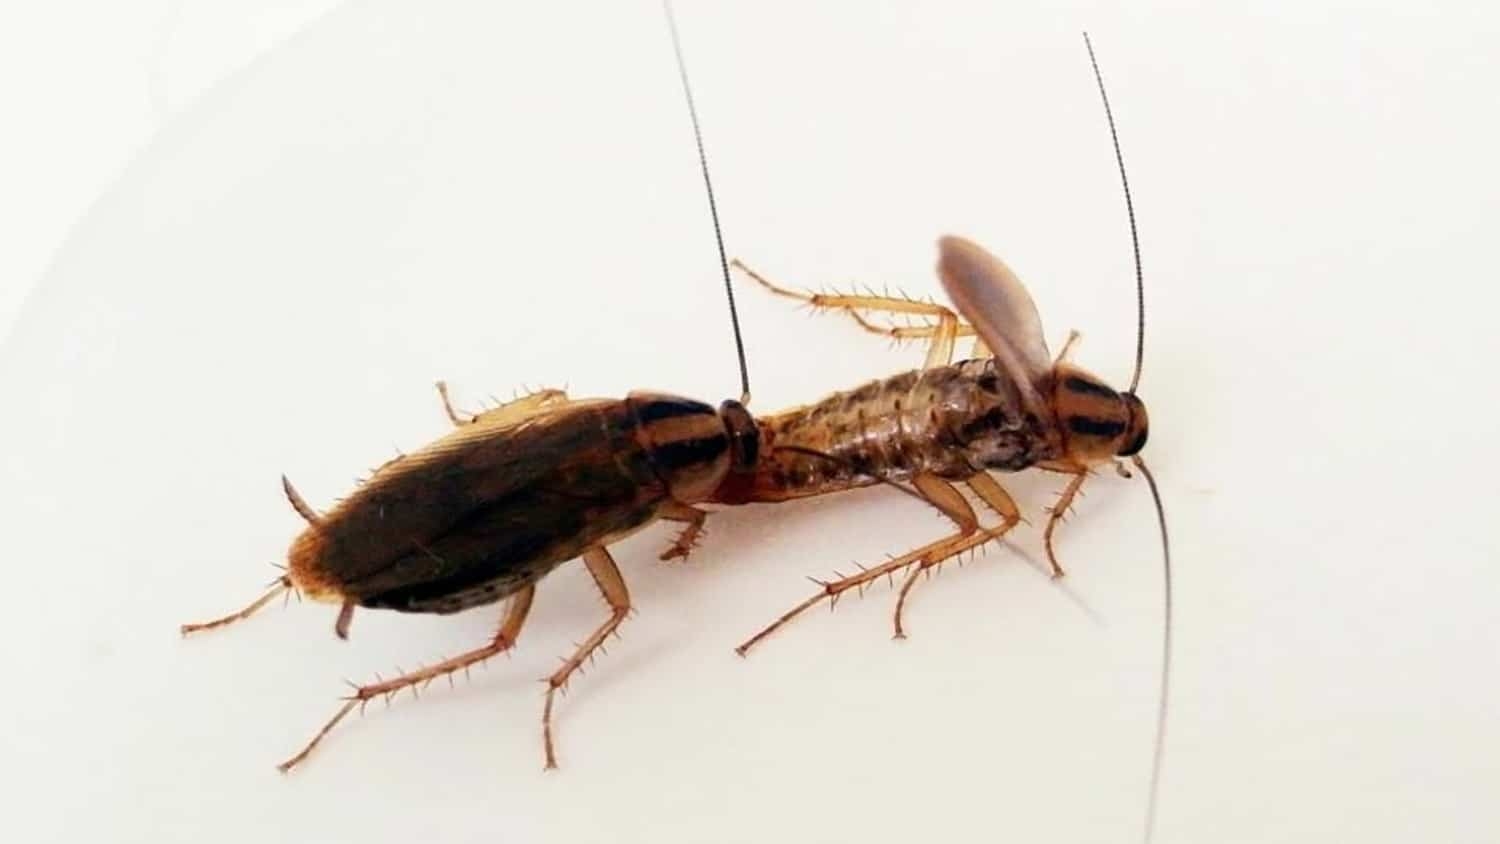 A male cockroach offers his abdomen to a female cockroach